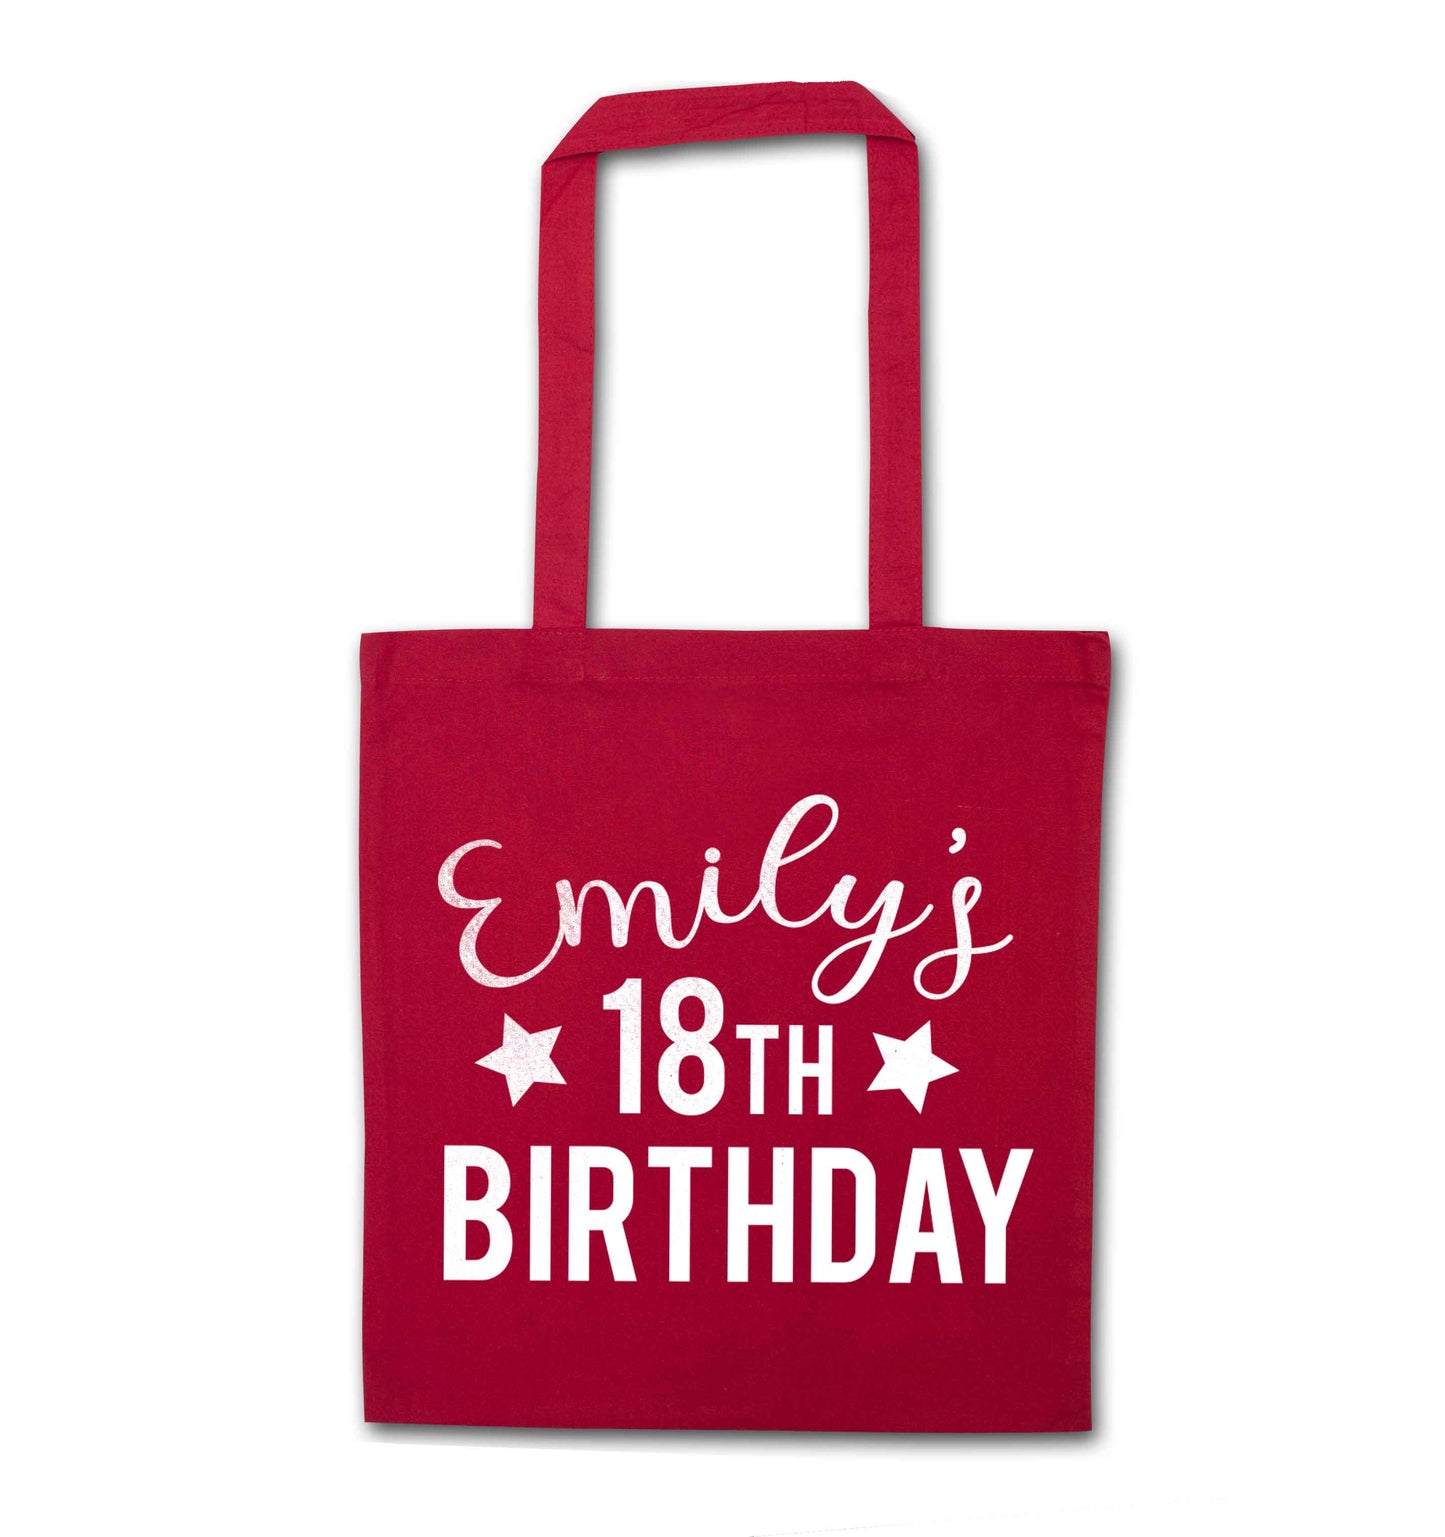 Personalised 18th birthday red tote bag